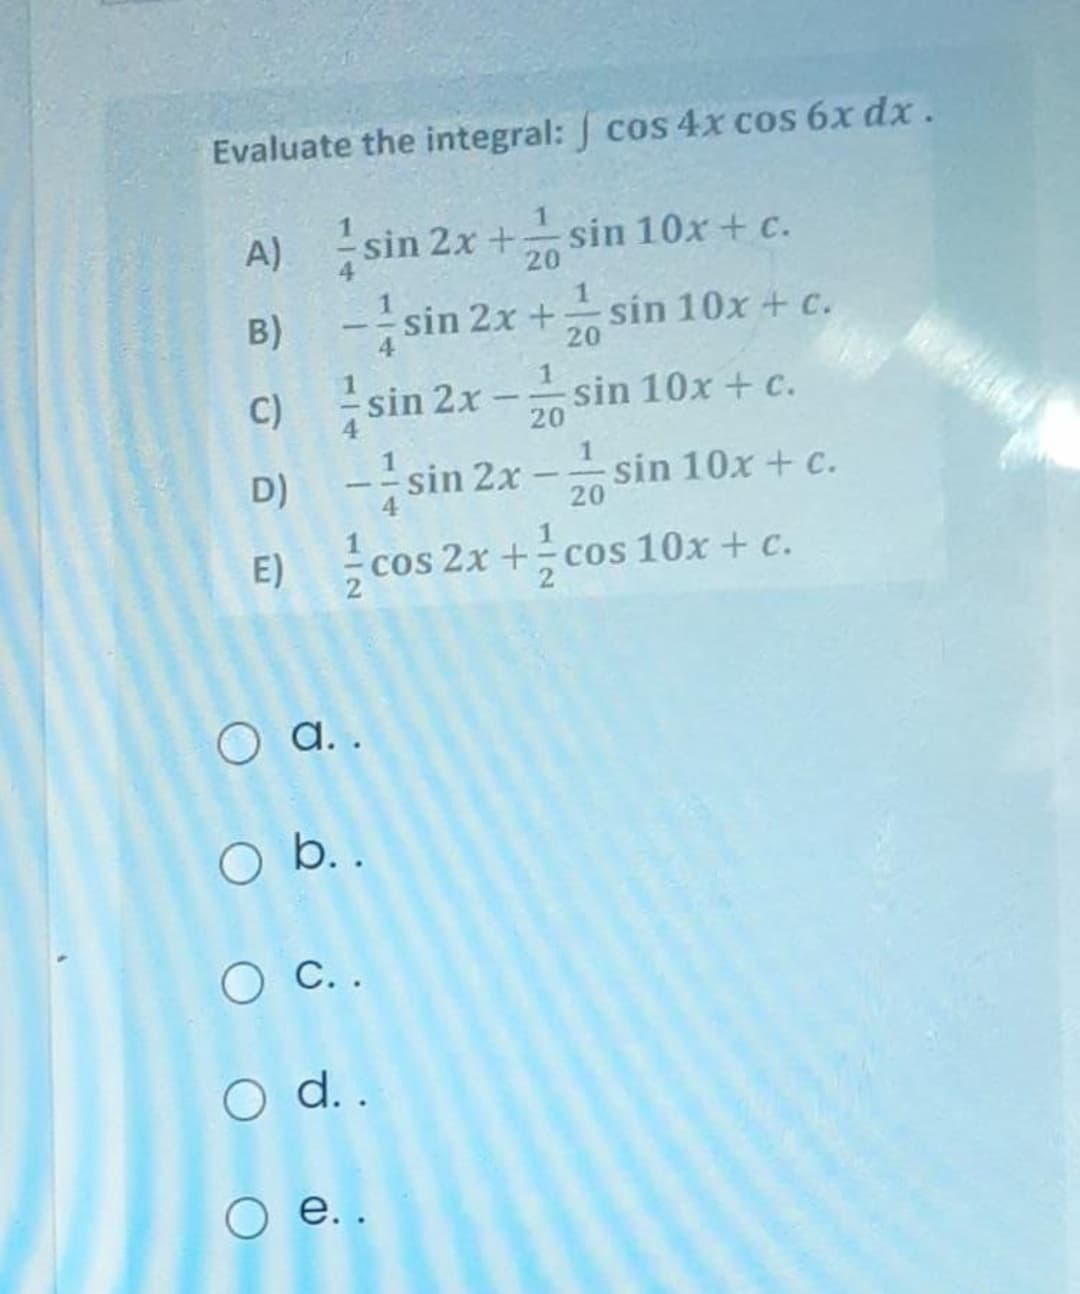 Evaluate the integral: cos 4x cos 6x dx.
A) sin 2x + sin 10x + c.
B) - sin 2x + sin 10x + c.
C) sin 2x - sin 10x + c.
-sin 2x -sin 10x + c.
E) cos 2x + cos 10x + c.
20
D)
4
20
O a..
O b. .
O C..
O ..
о е..
